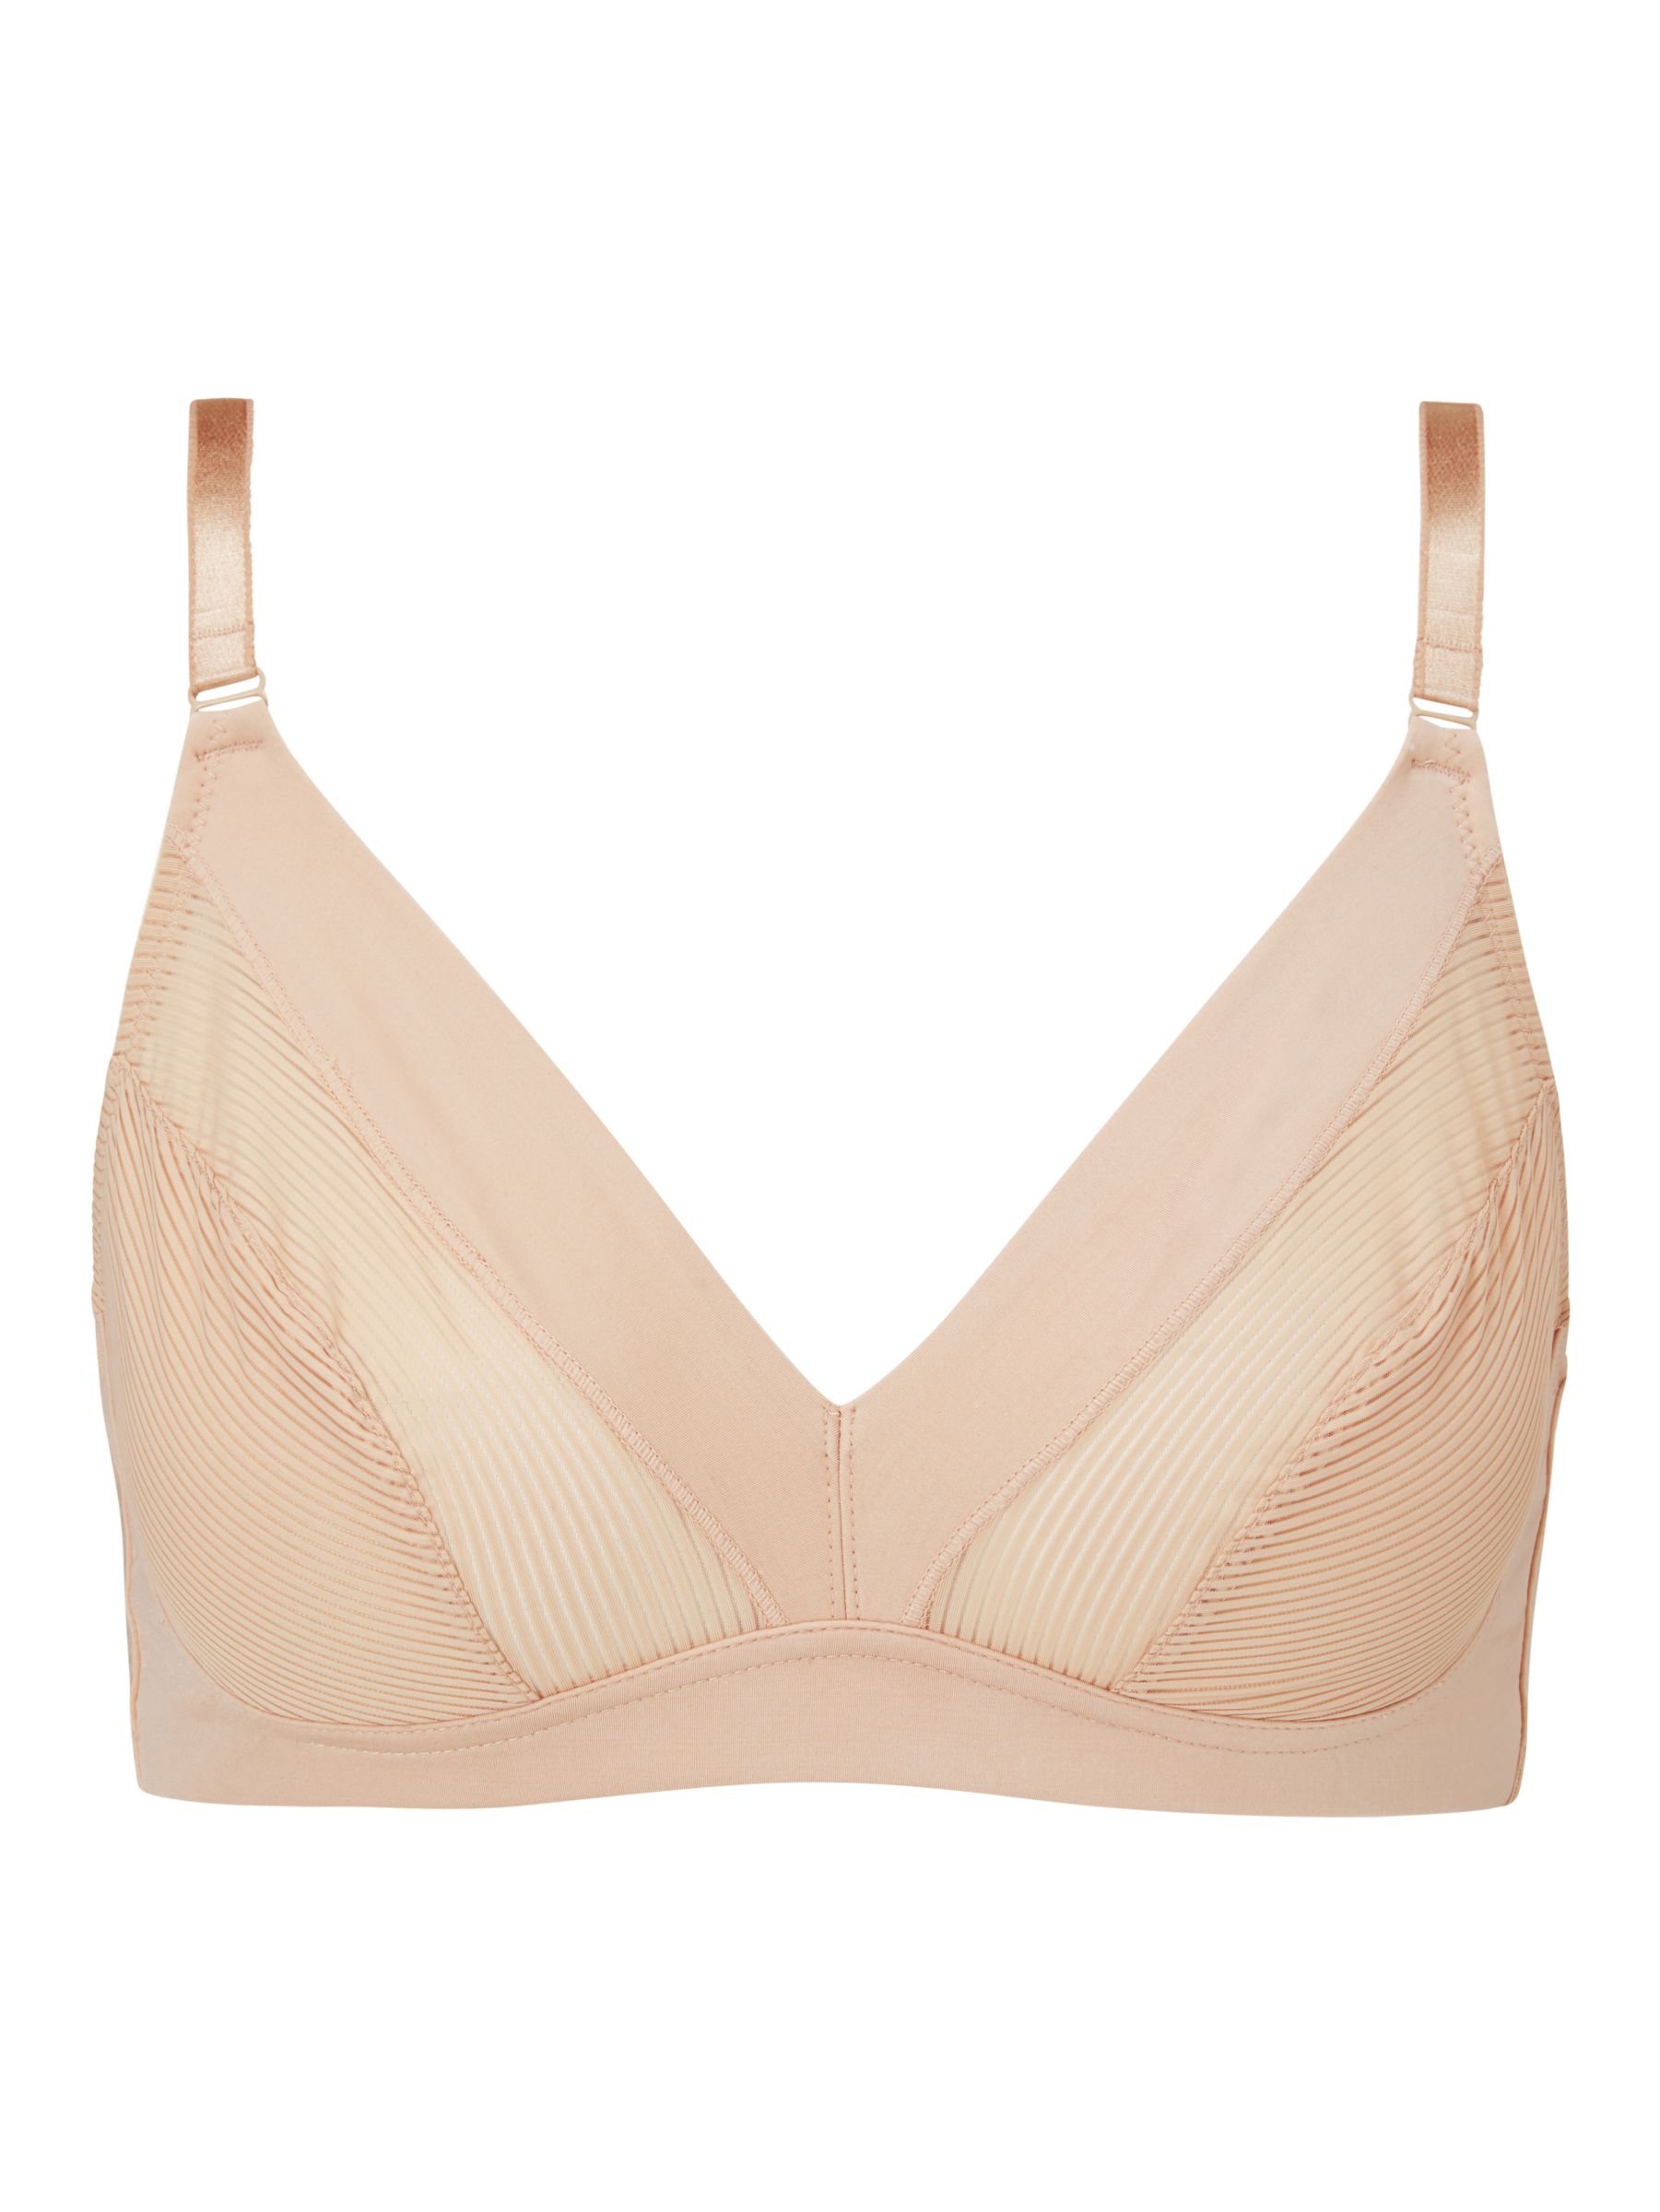 John Lewis Leah Non Wired Non Padded Bra, Almond at John Lewis & Partners